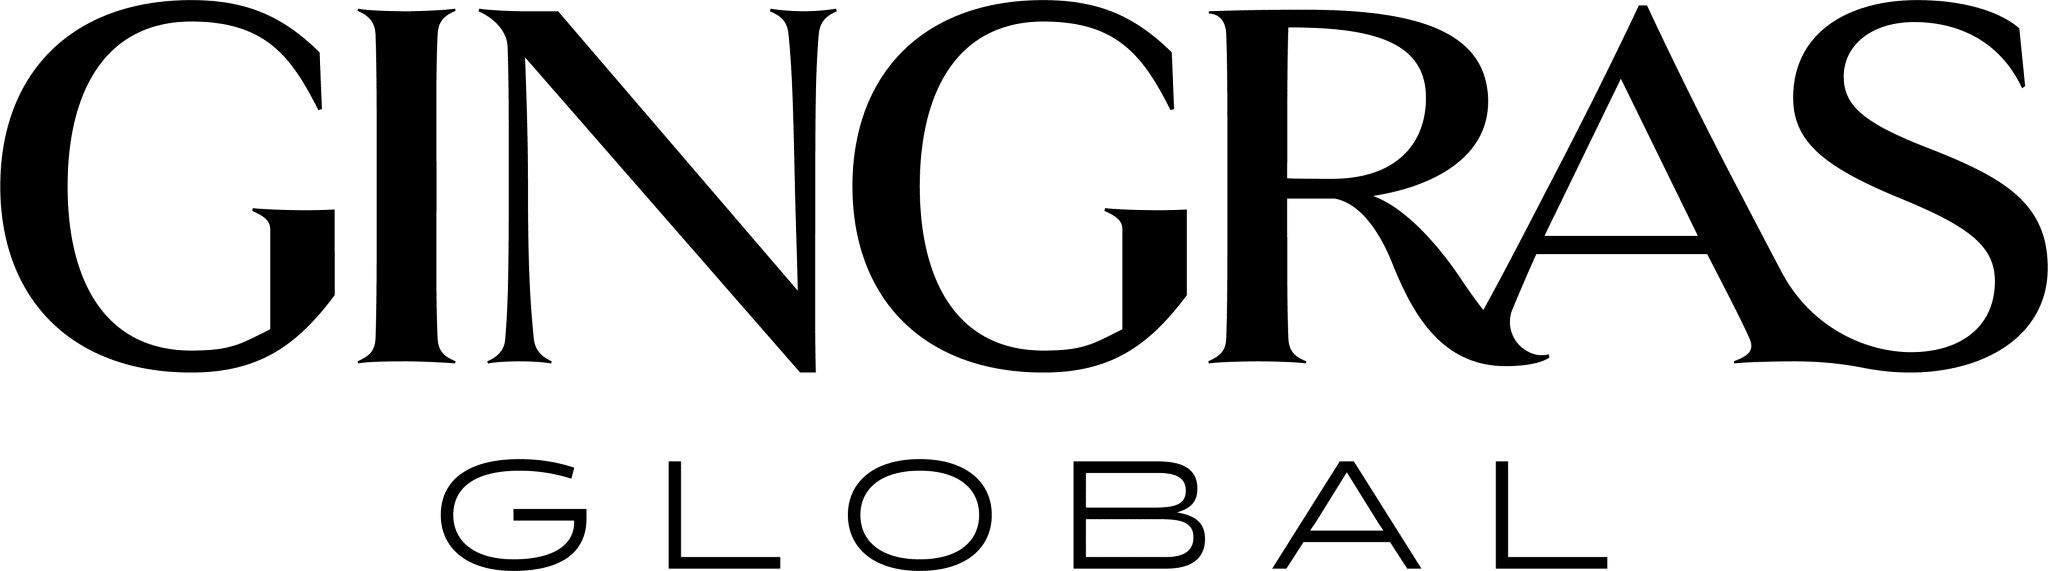 All Events – Christian Business Round Table | Gingras Global : 